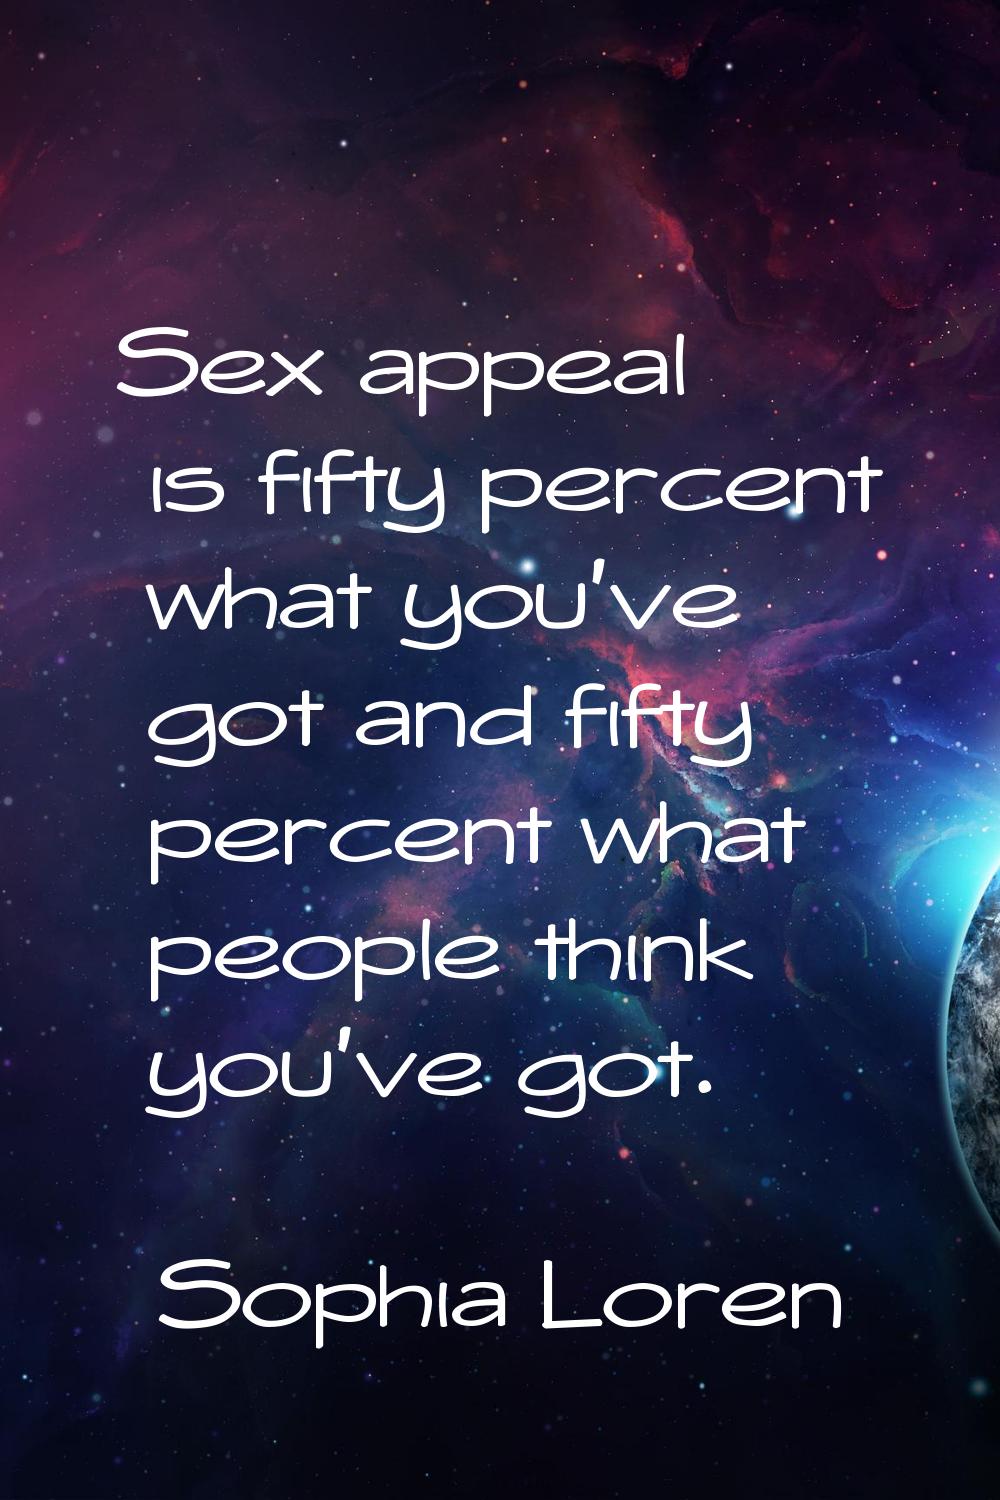 Sex appeal is fifty percent what you've got and fifty percent what people think you've got.